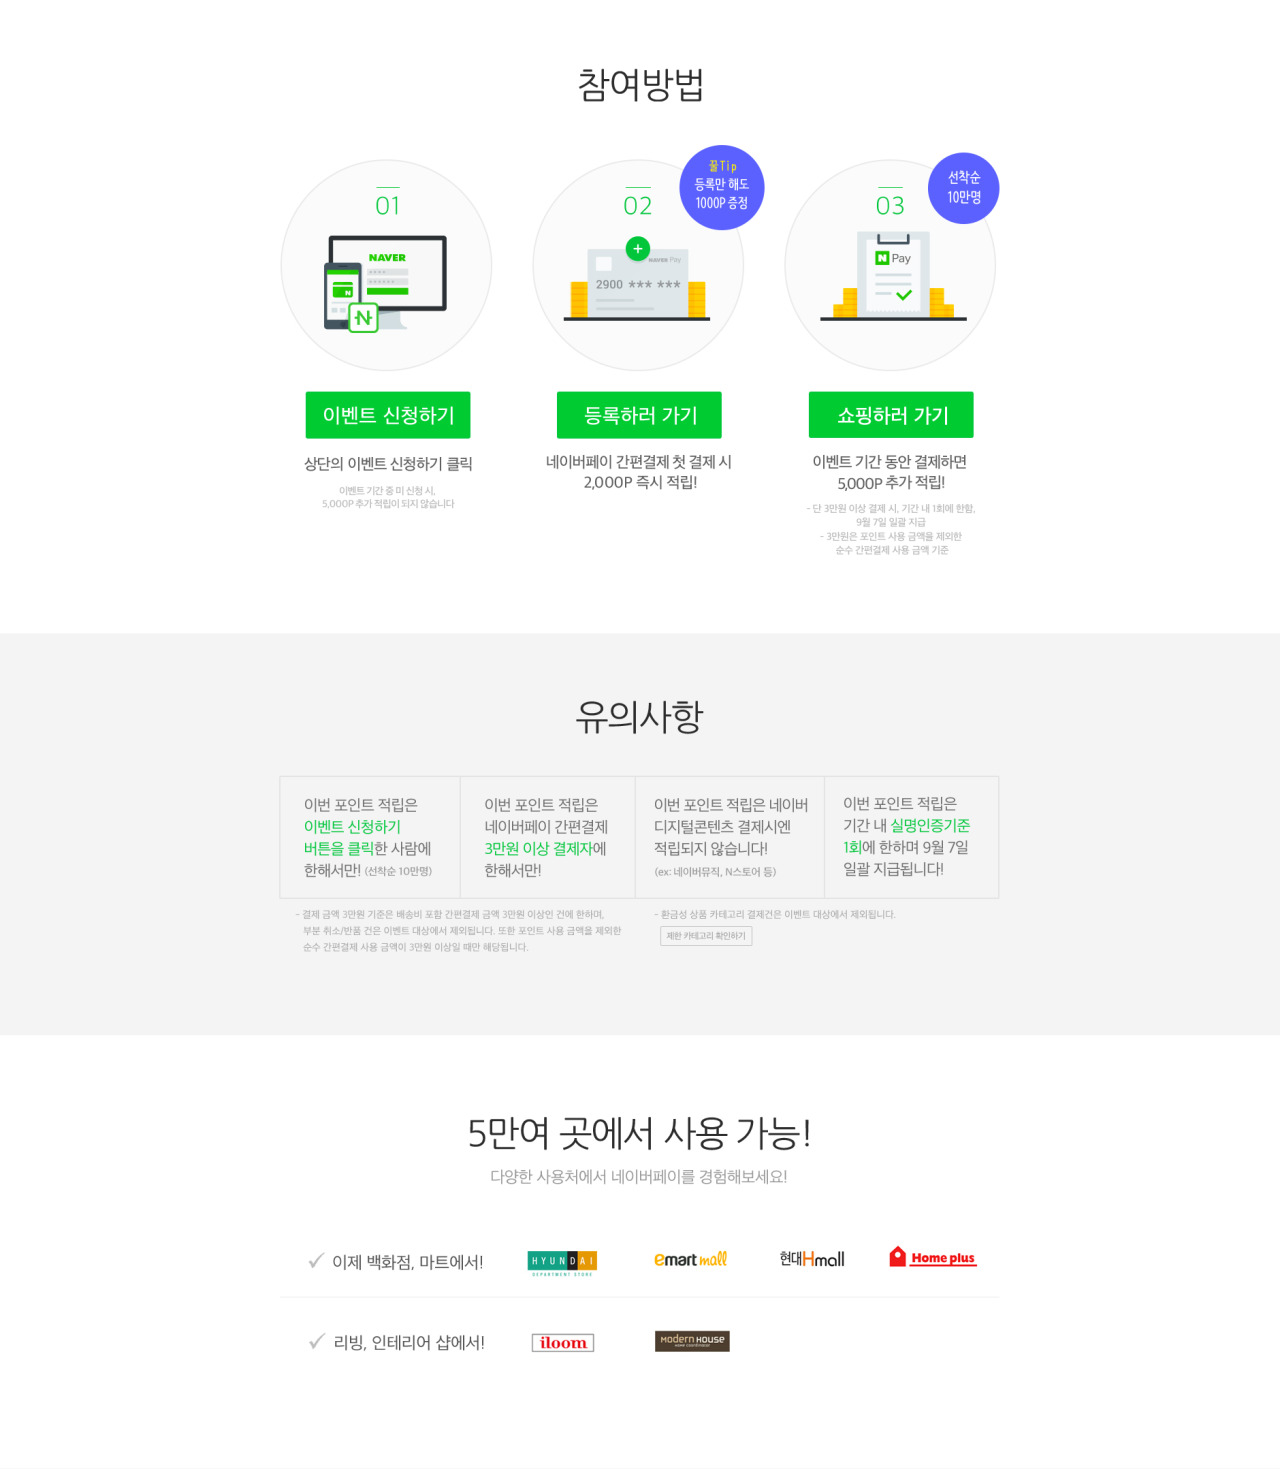 Ntmmt Title 포인트로 압도하다 Naver Pay Type Payment